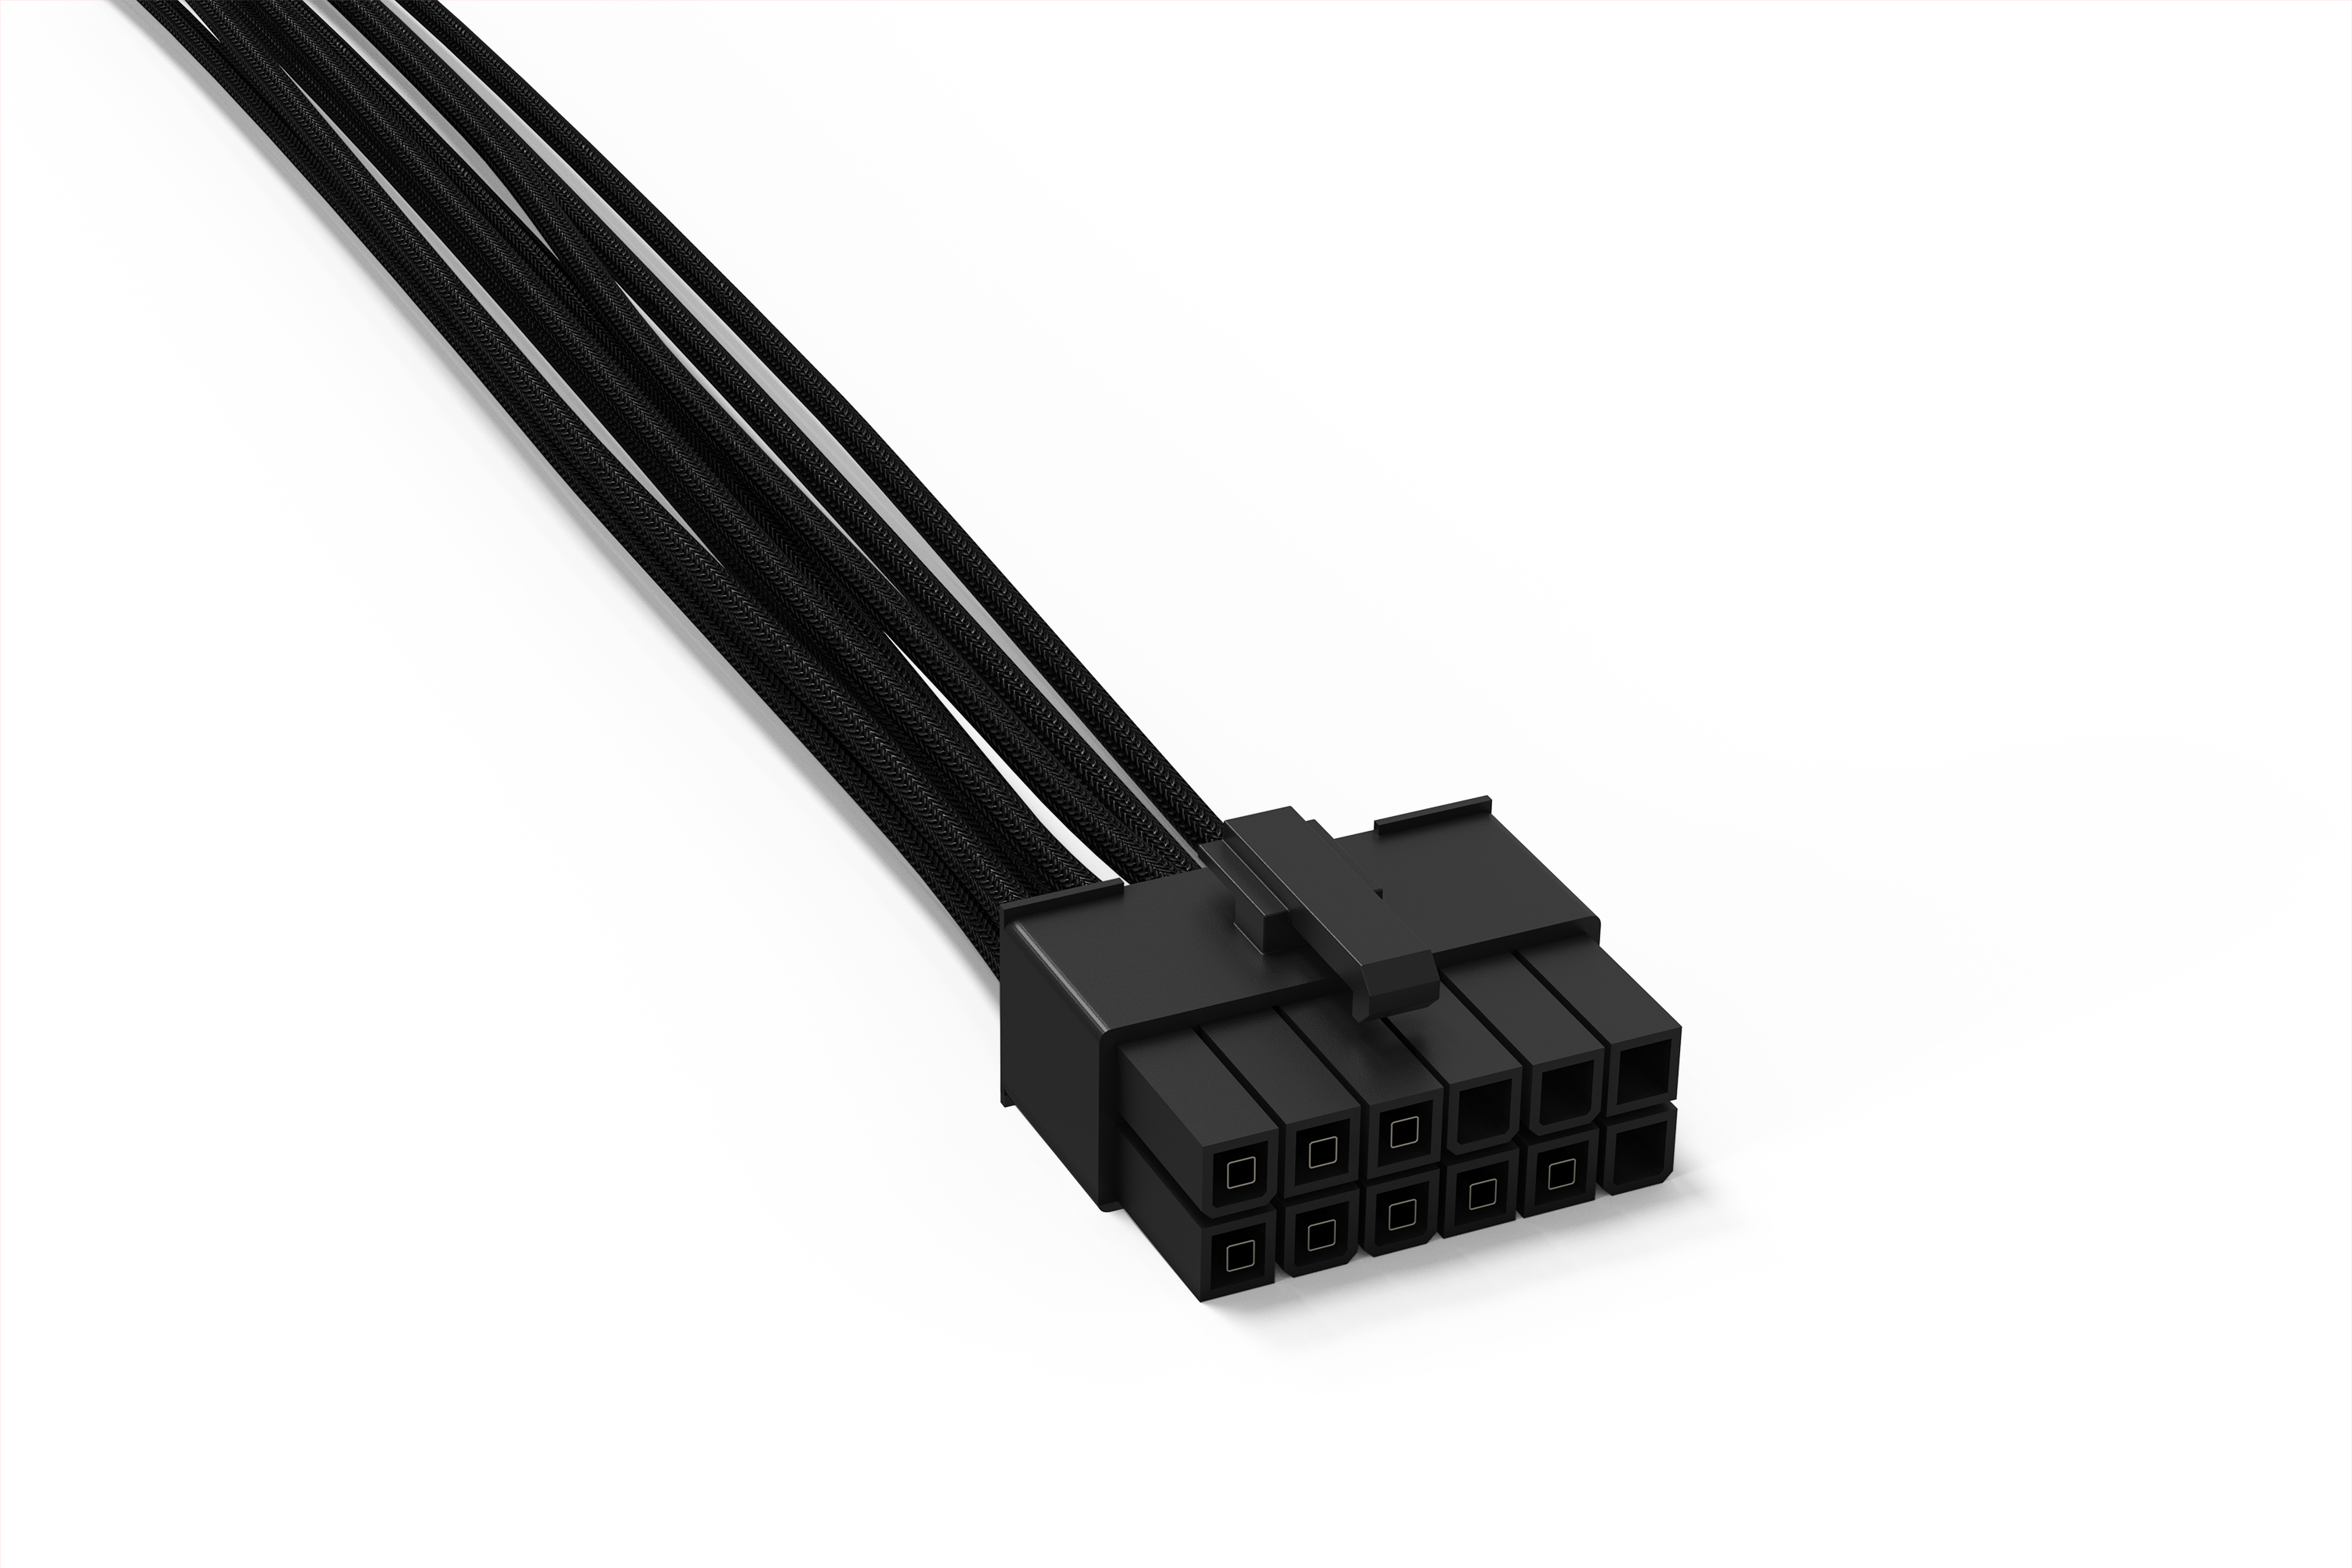 CABLE from | POWER CS-6610 quiet! be